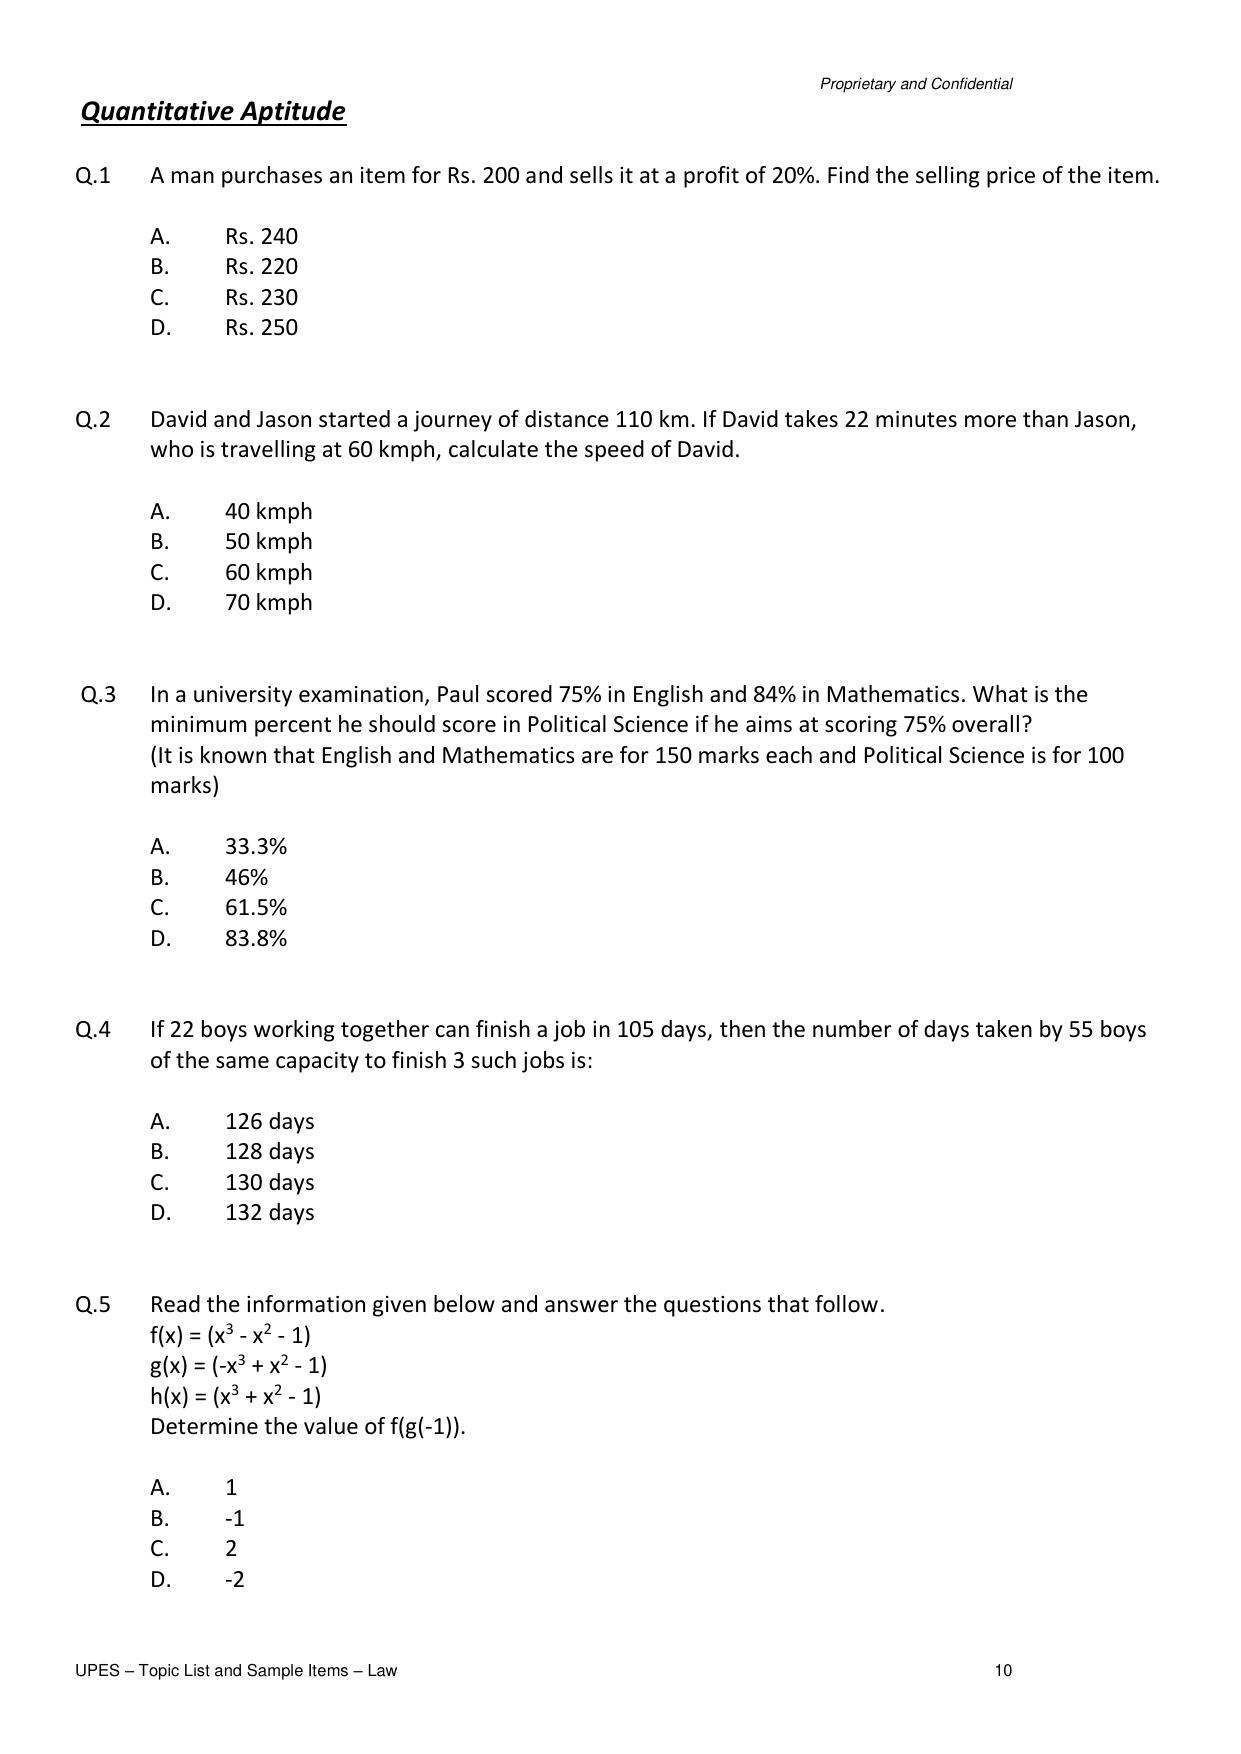 UPES Law Sample Papers - Page 10